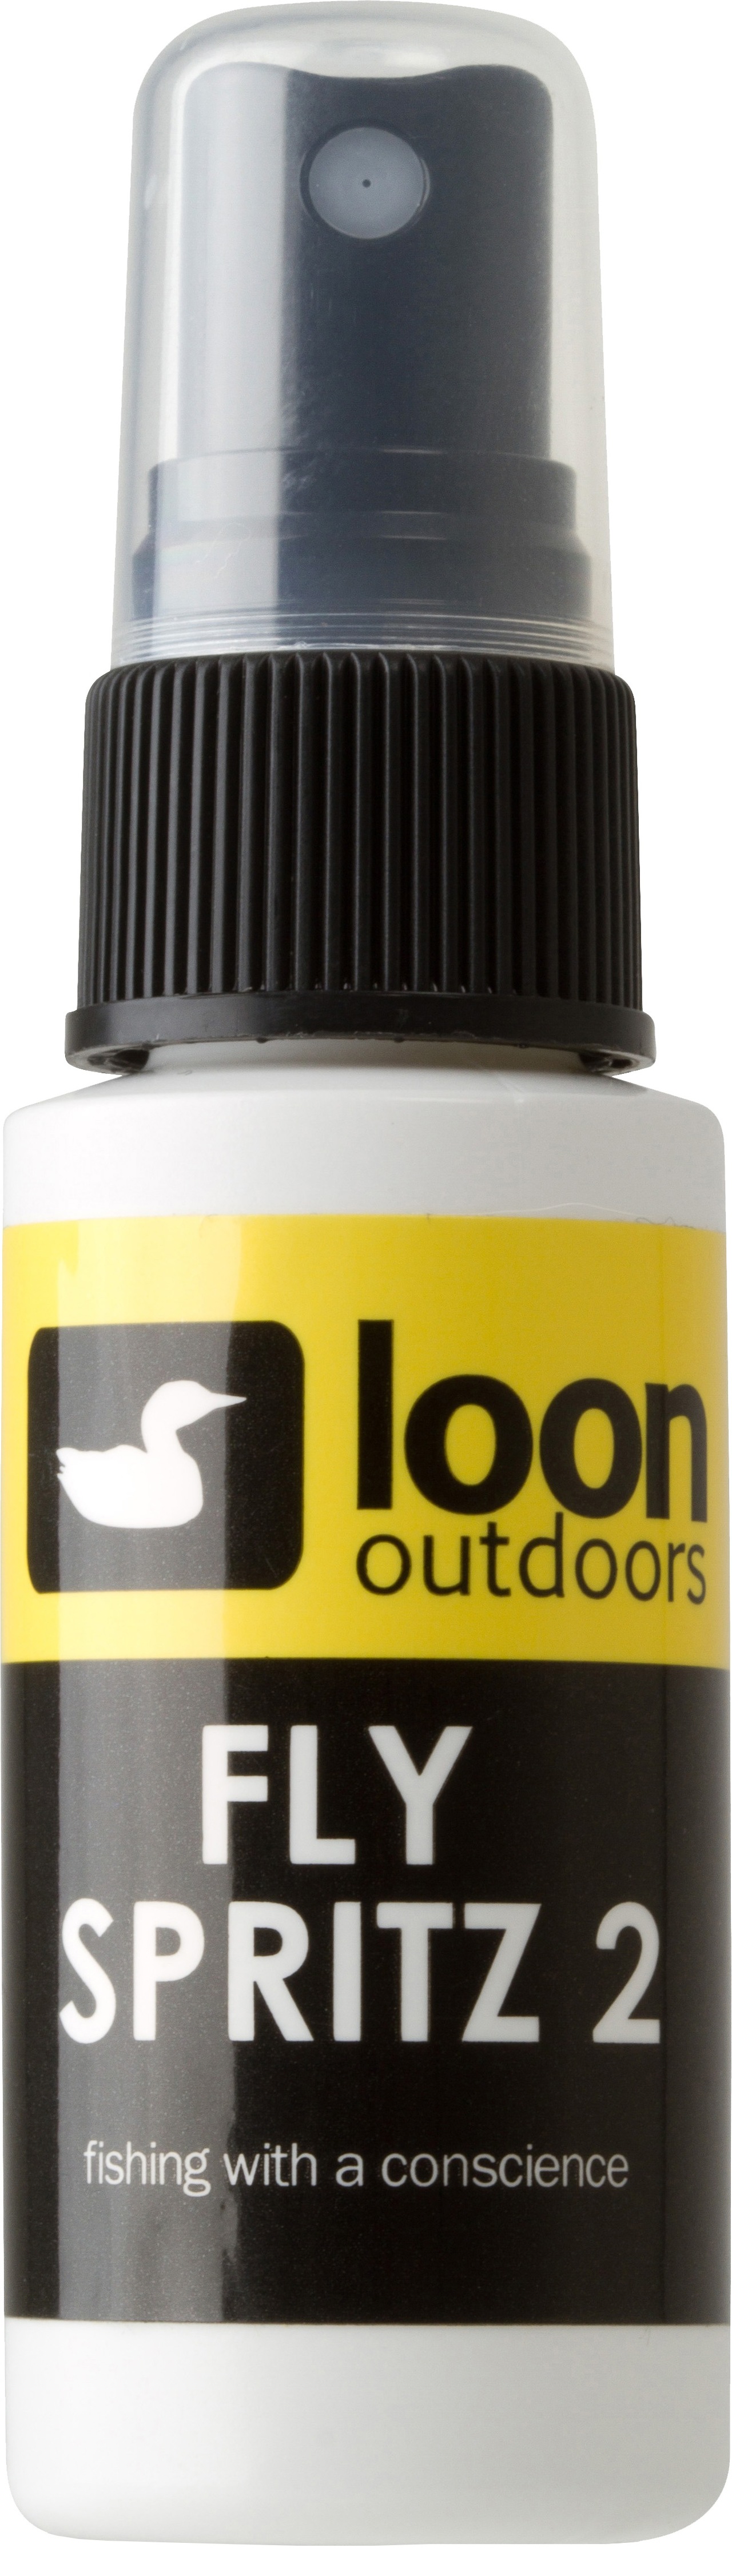 Loon Outdoors - Top Ride